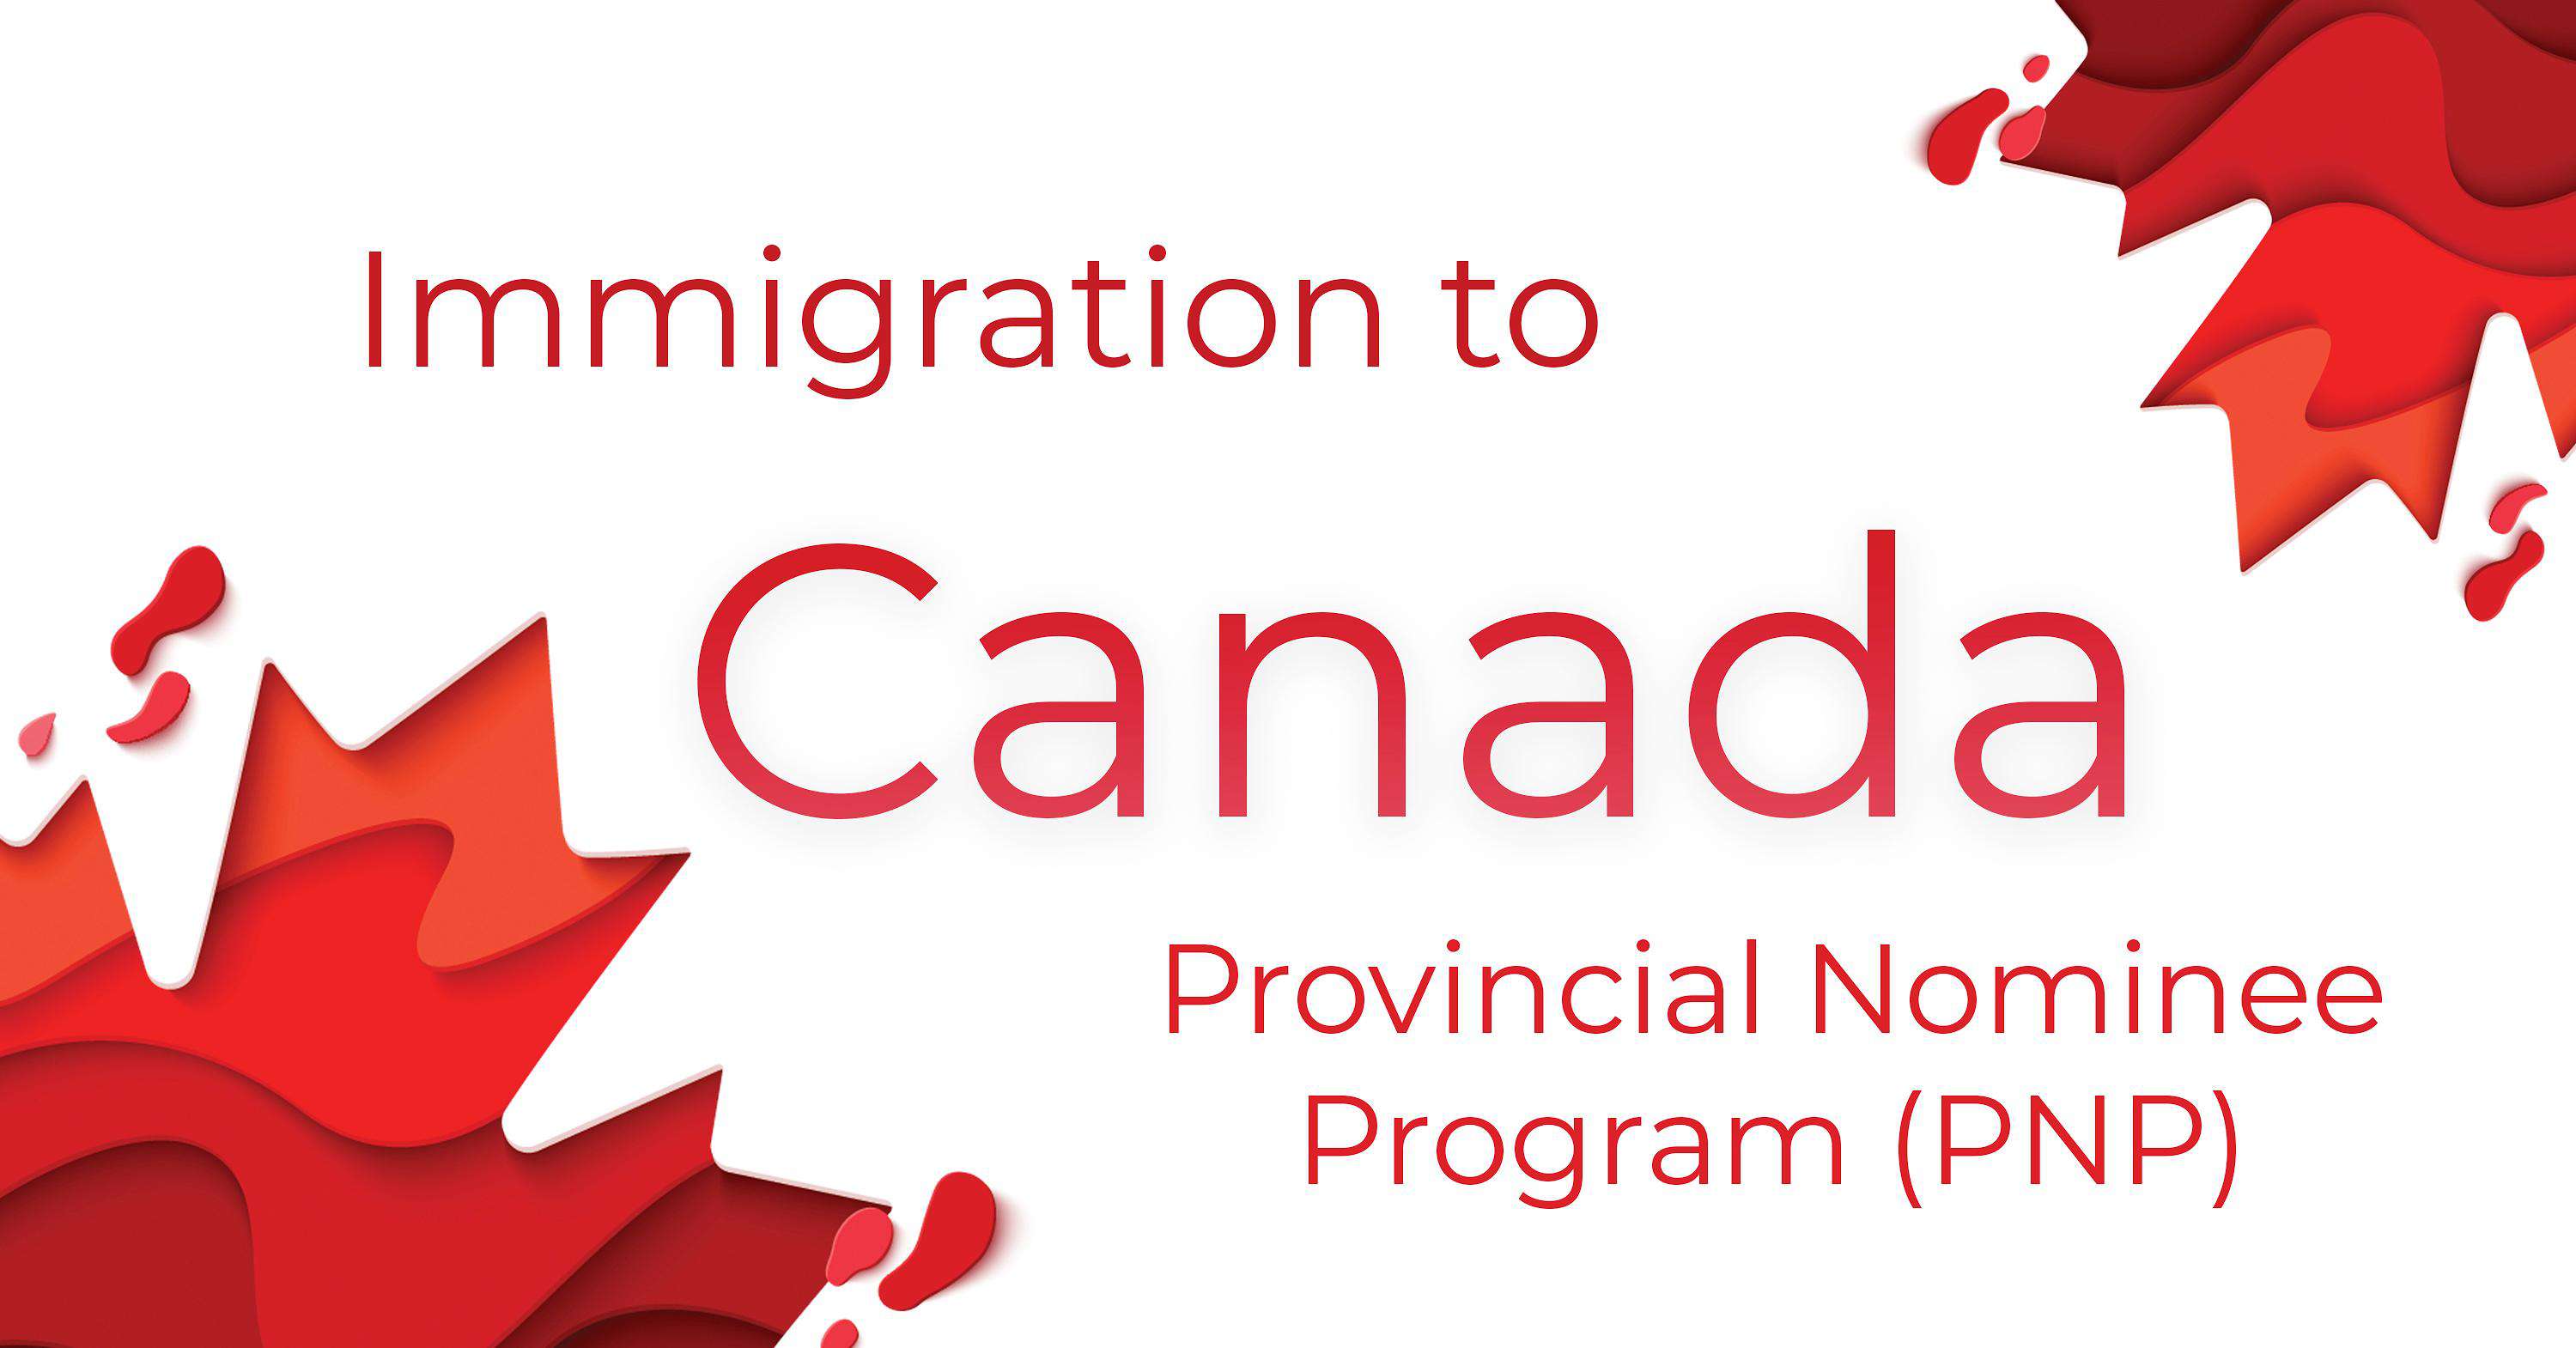 Google Ad Exchange Ad Example 36903 - Immigrate To Canada